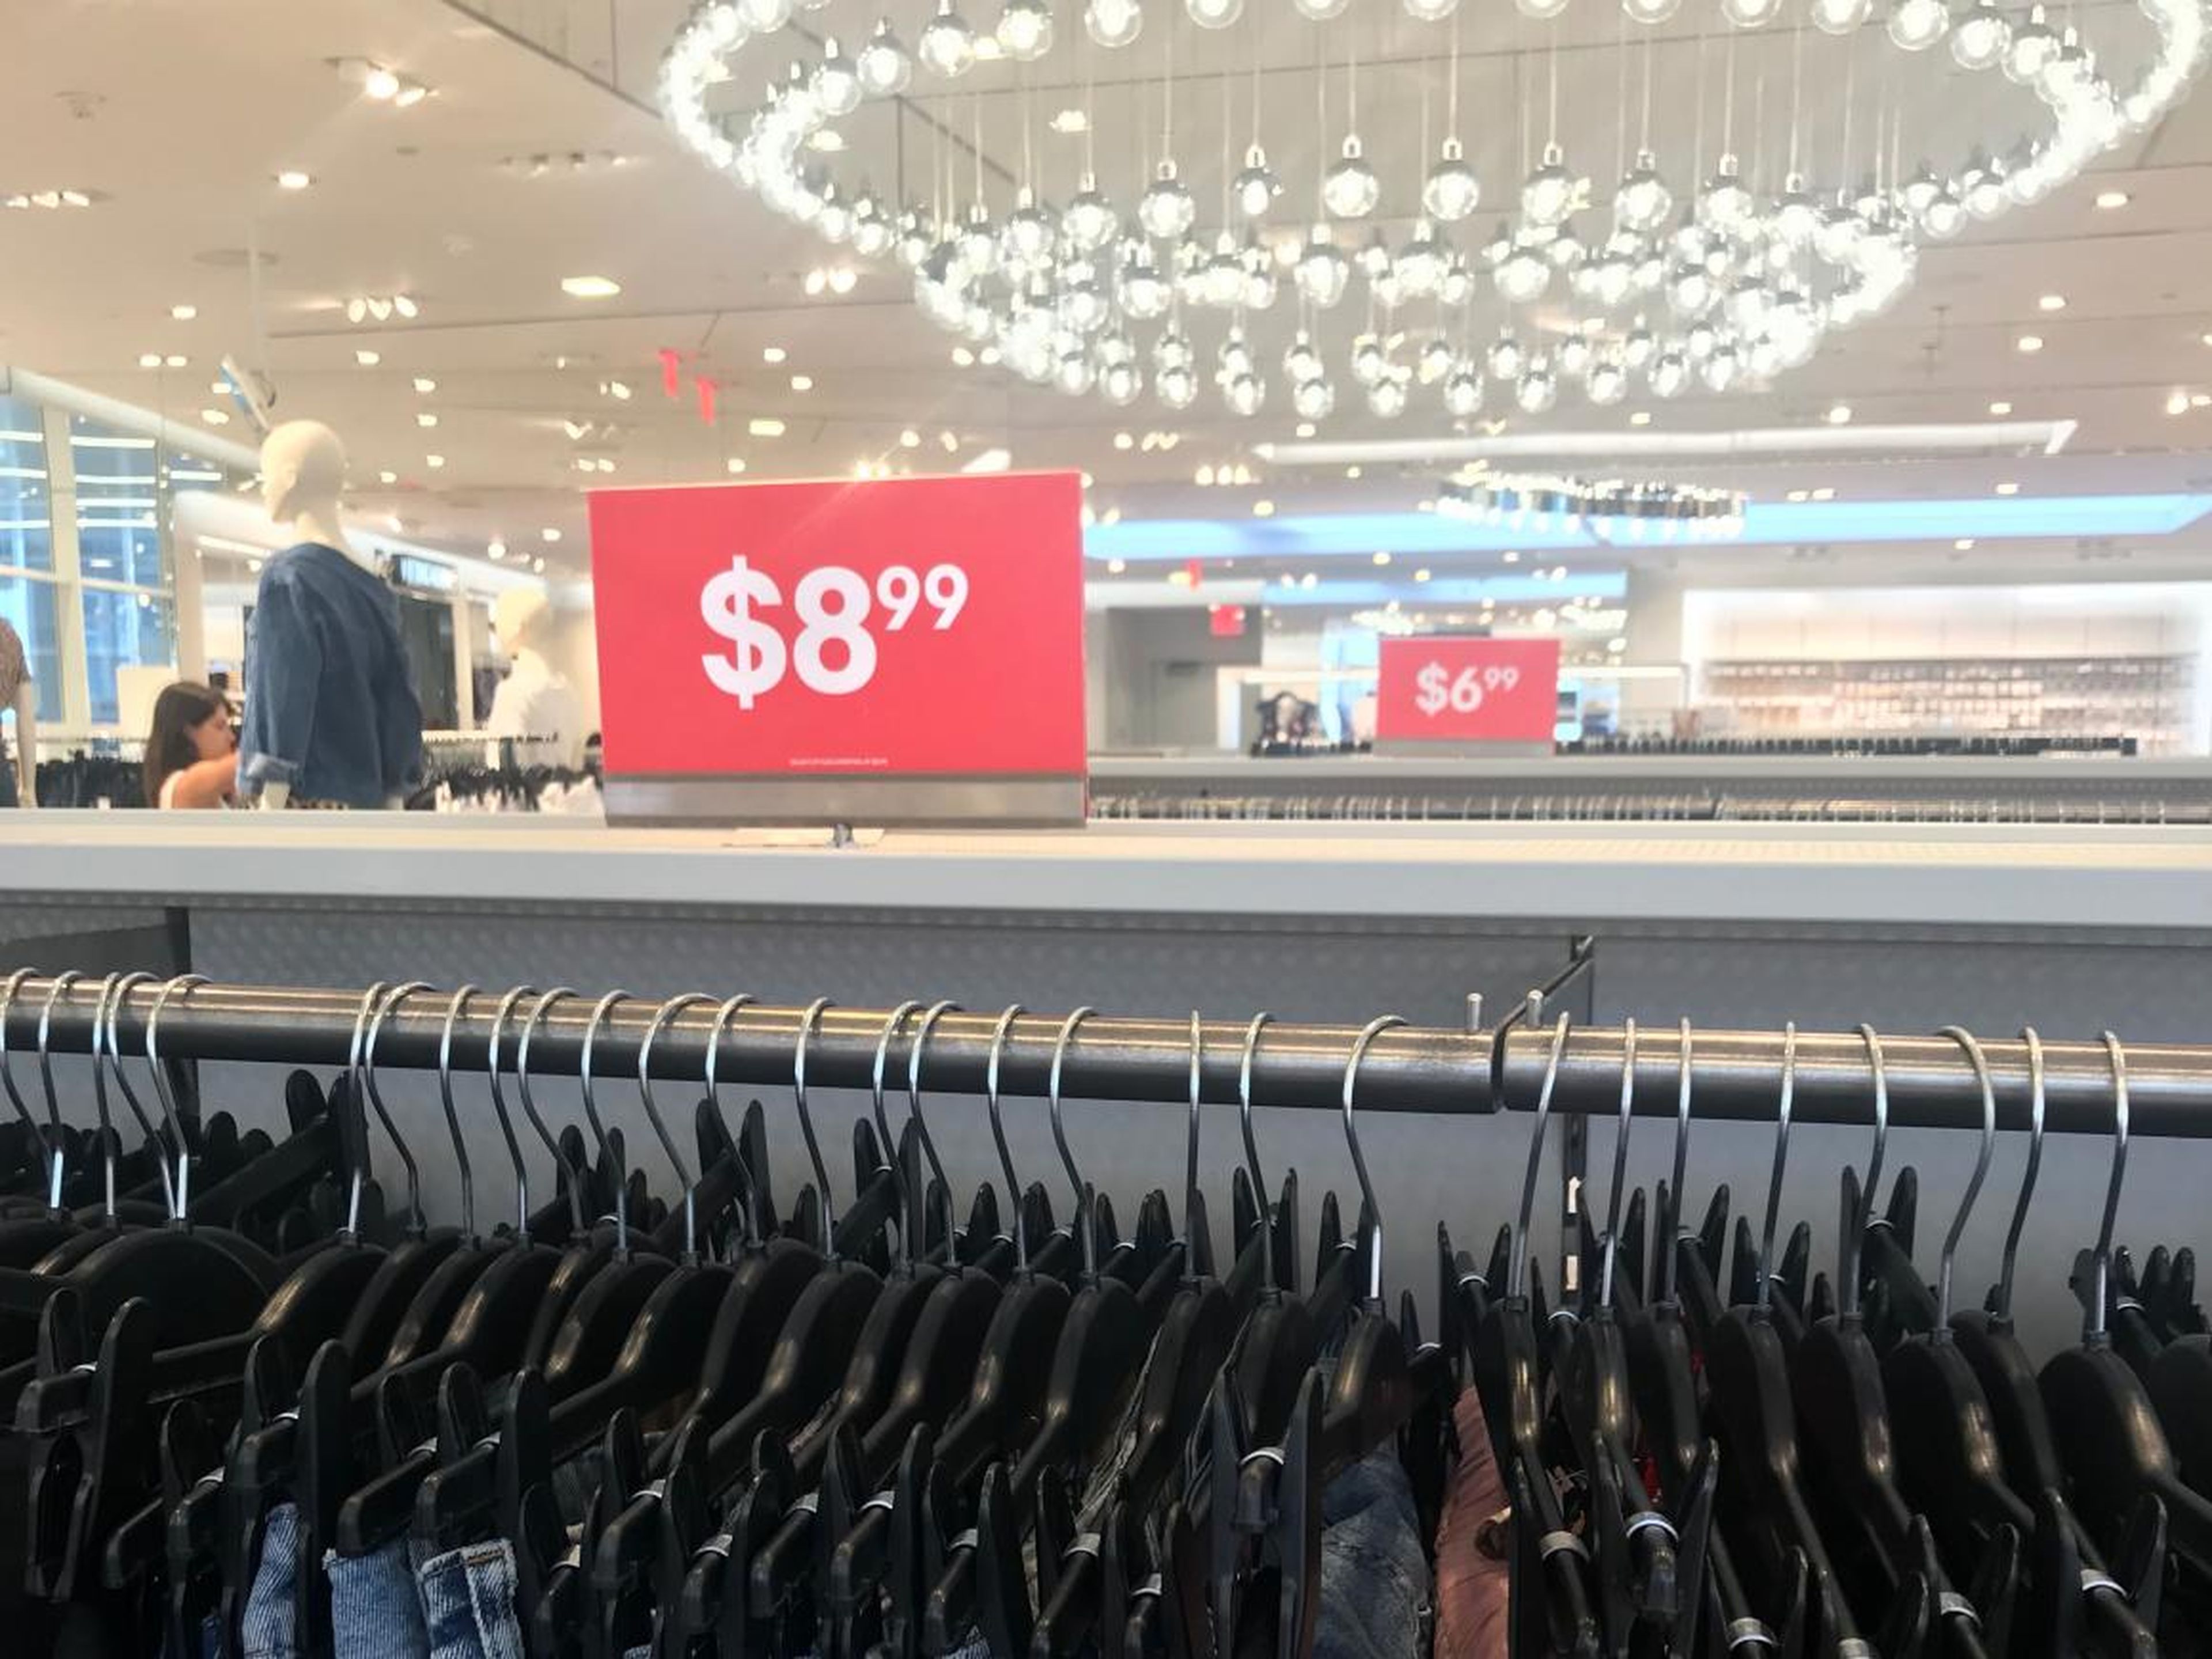 Though we did find a couple of additional sale areas throughout the store, with super low prices, including these jeans for $8.99.